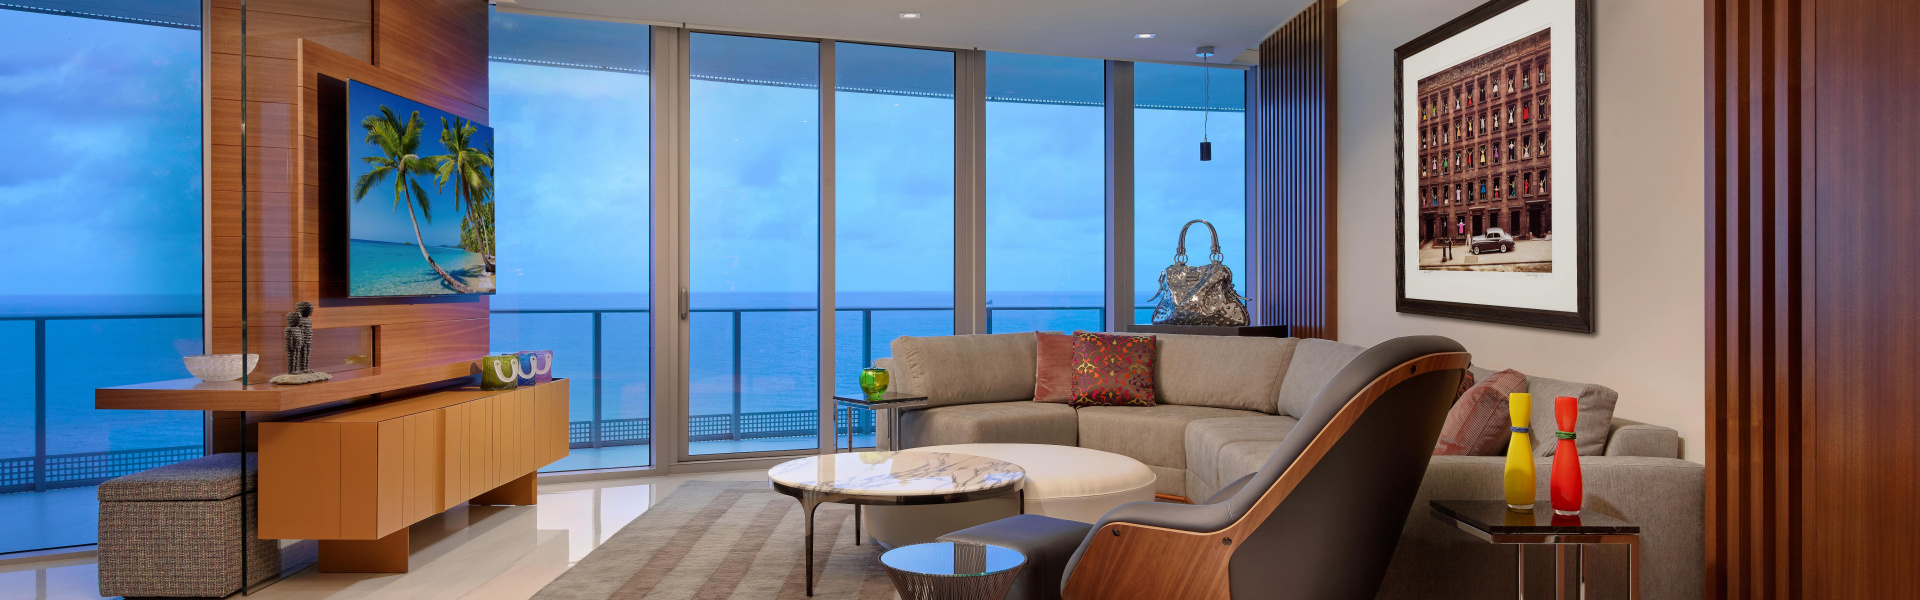 Smart home installation by Illusive Automation for Boca Raton